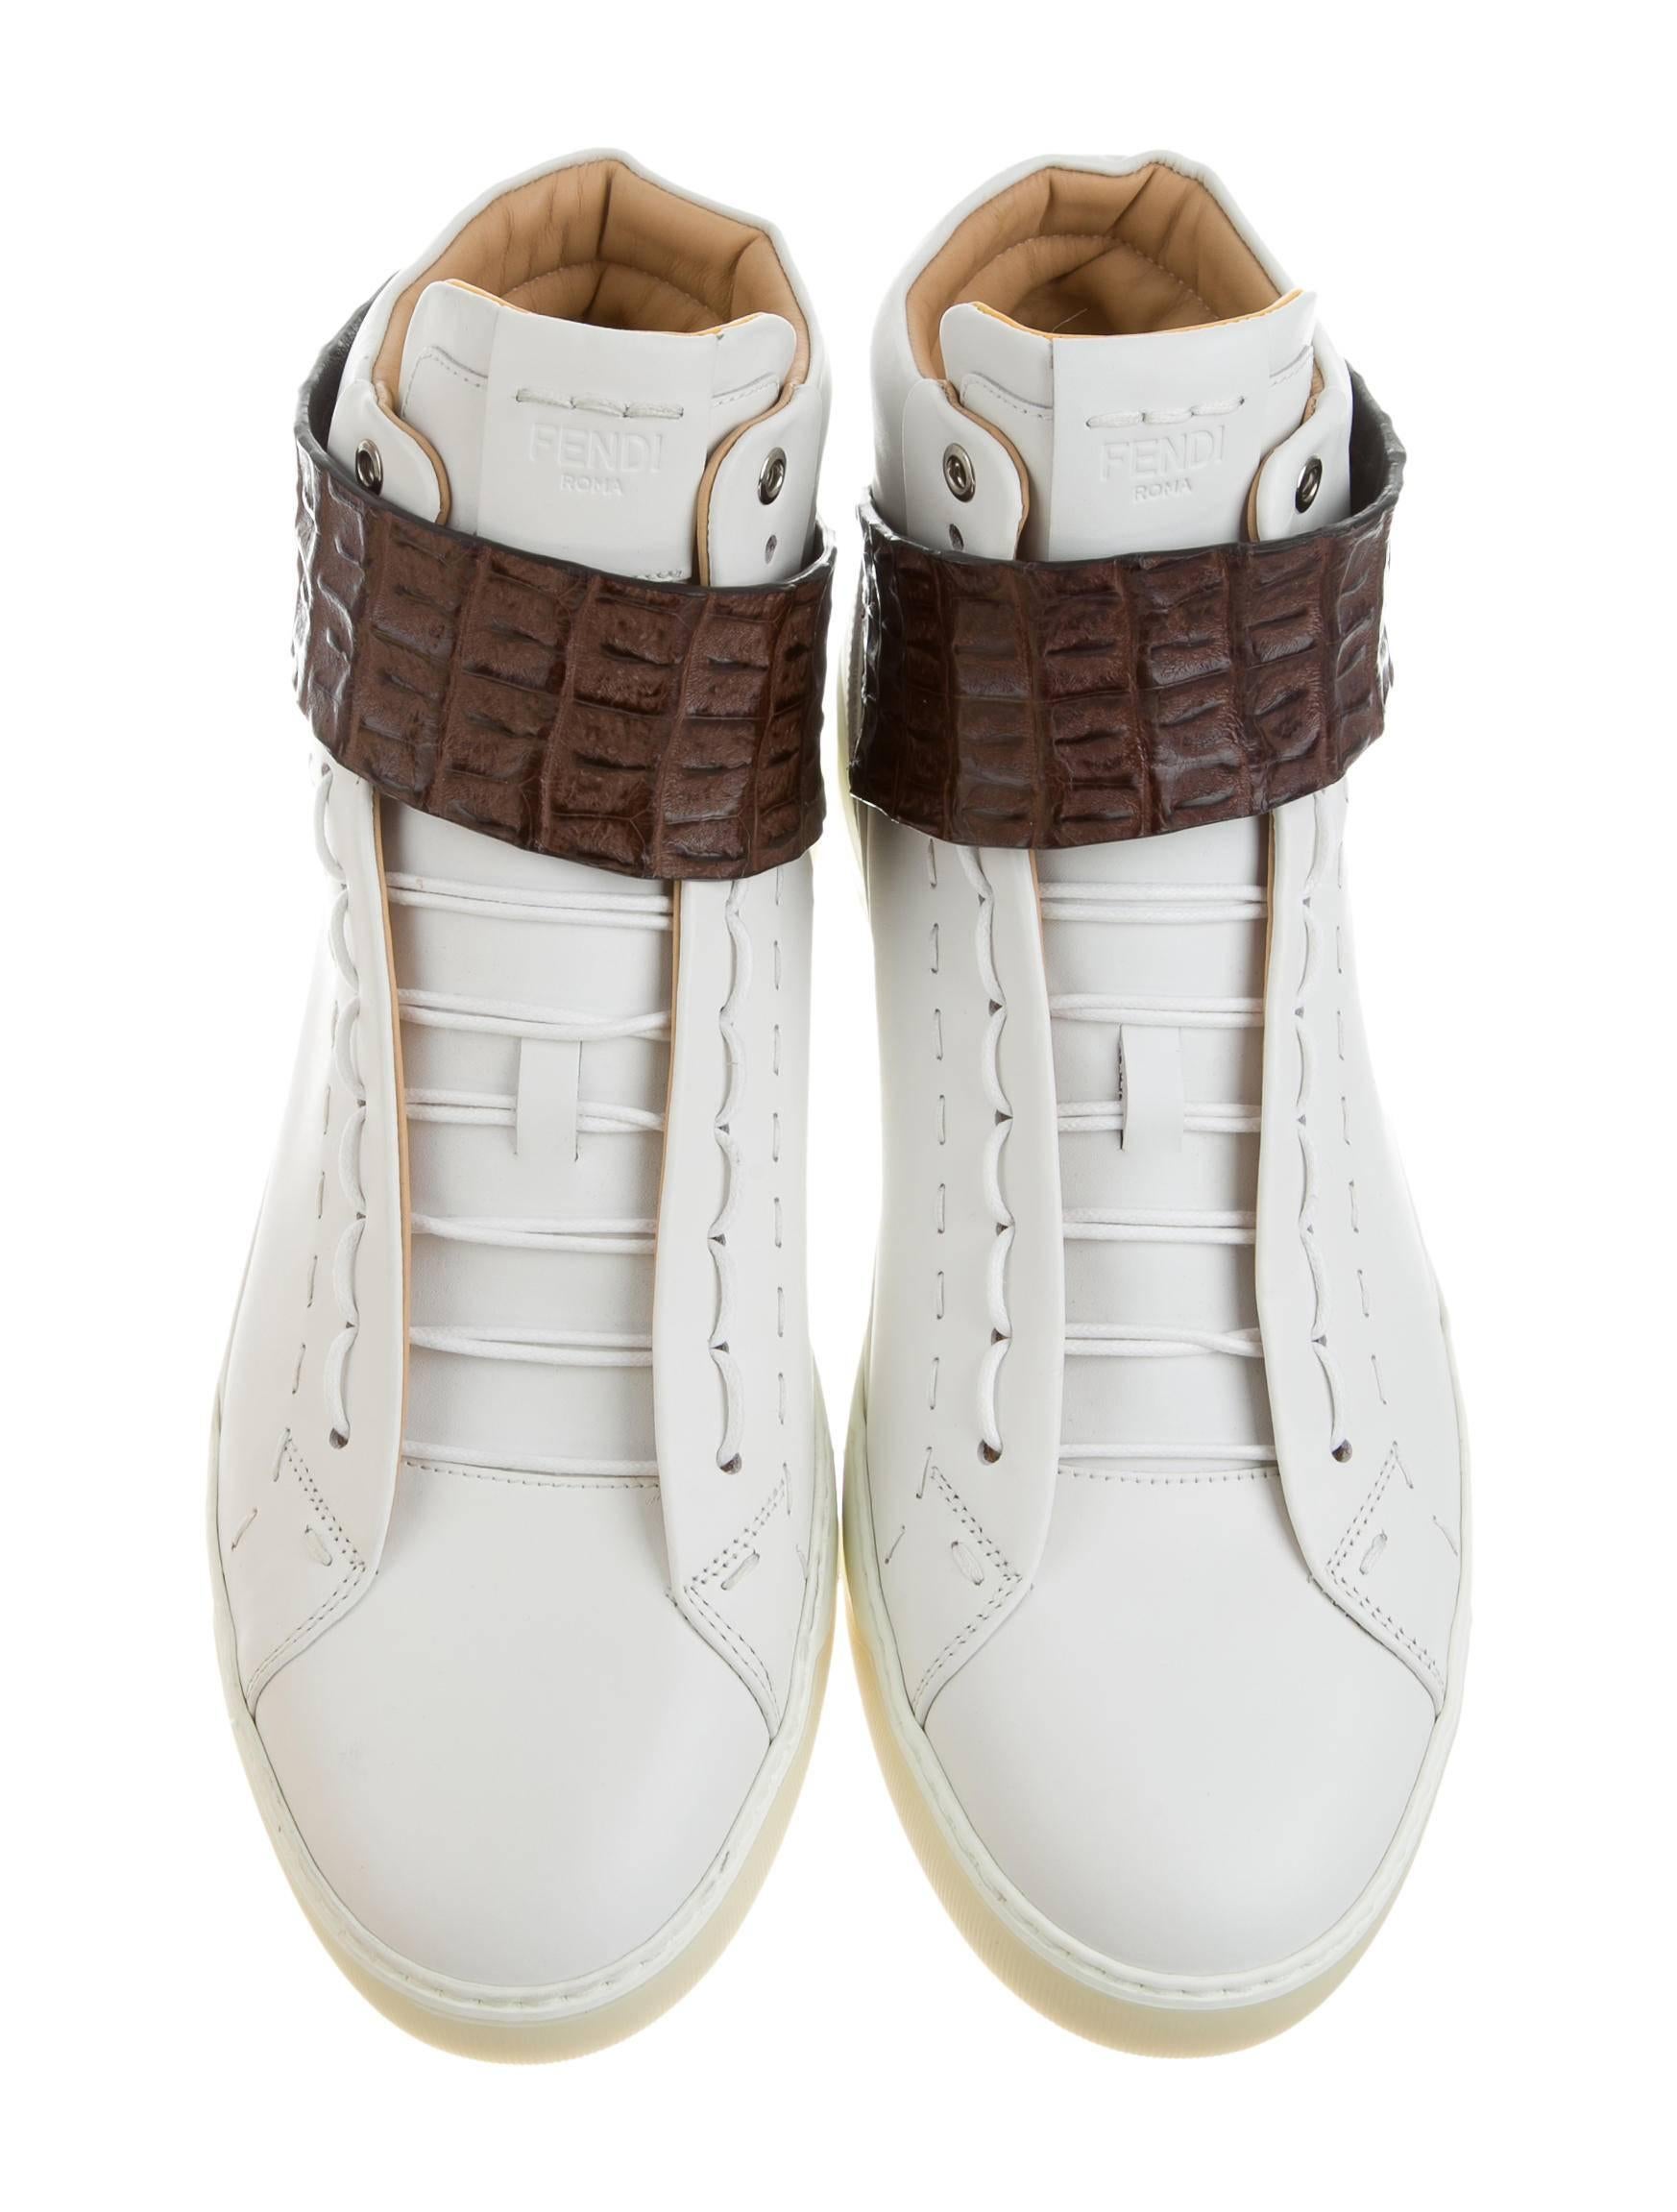 CURATOR'S NOTES

Fendi NEW Men's Limited Edition White Leather High Tops Sneakers Shoes in Box  

Size listed UK 11 (US 12)
Leather
Crocodile trim
Silver tone hardware
Rubber sole
Velcro and tie closure
Made in Italy
Heel height 1.25"
Includes